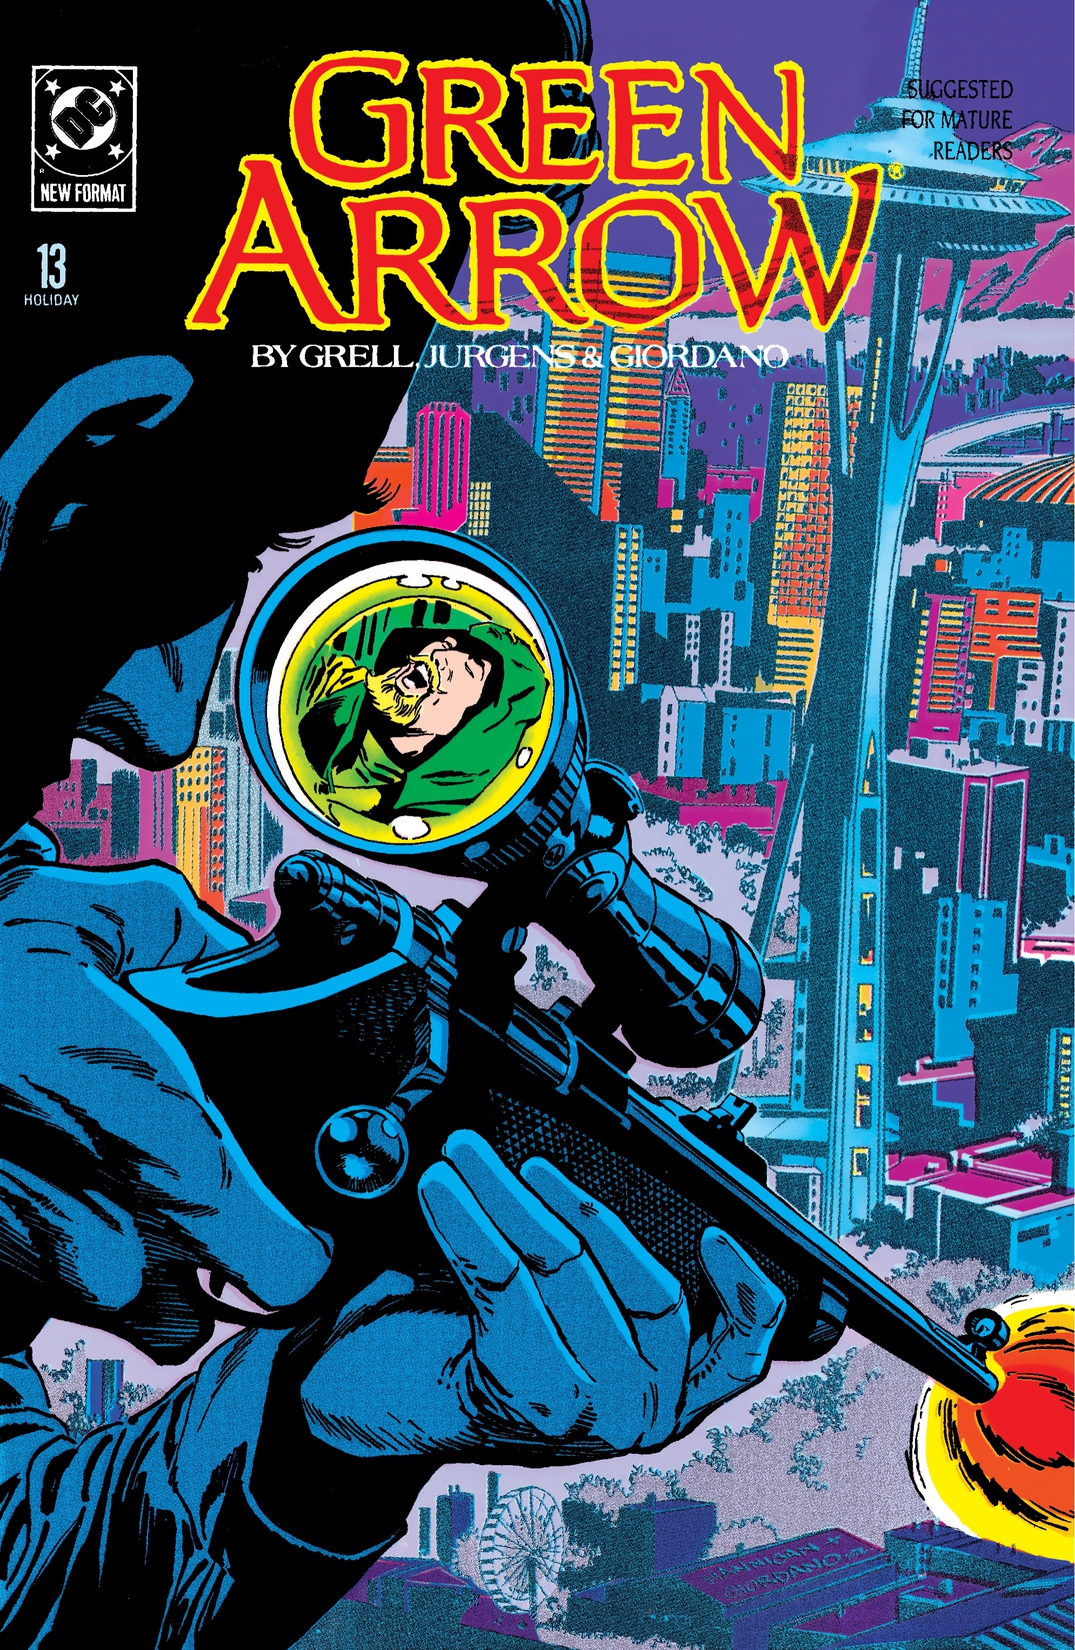 Green Arrow (1987-) #13 preview images